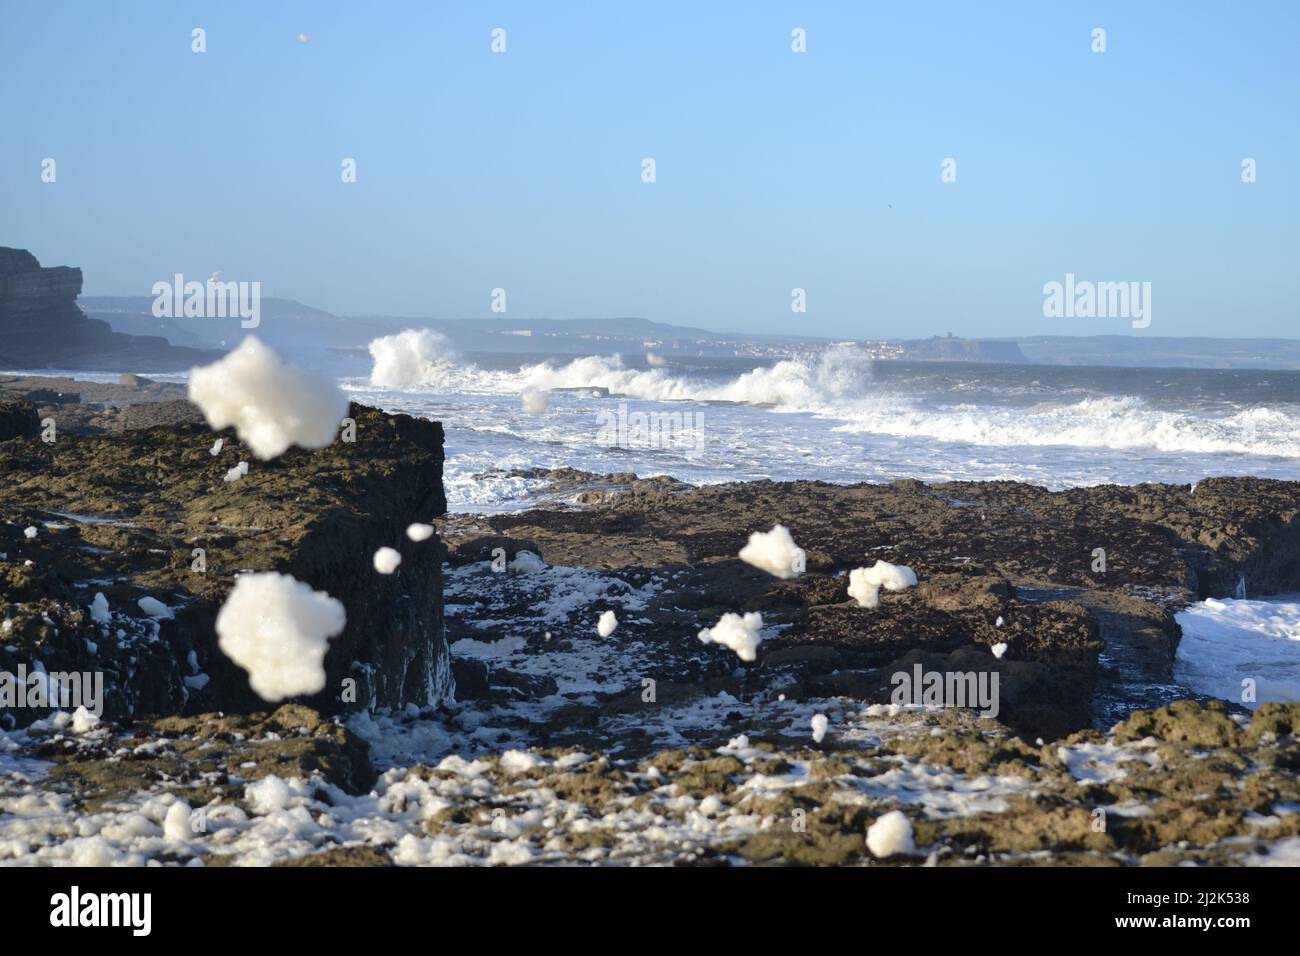 White Sea Foam Blowing Across Filey Brigg Rocks And Boulders - Windy Sunny Day - Rough North Sea - White Horses On North Sea - Yorkshire UK Stock Photo